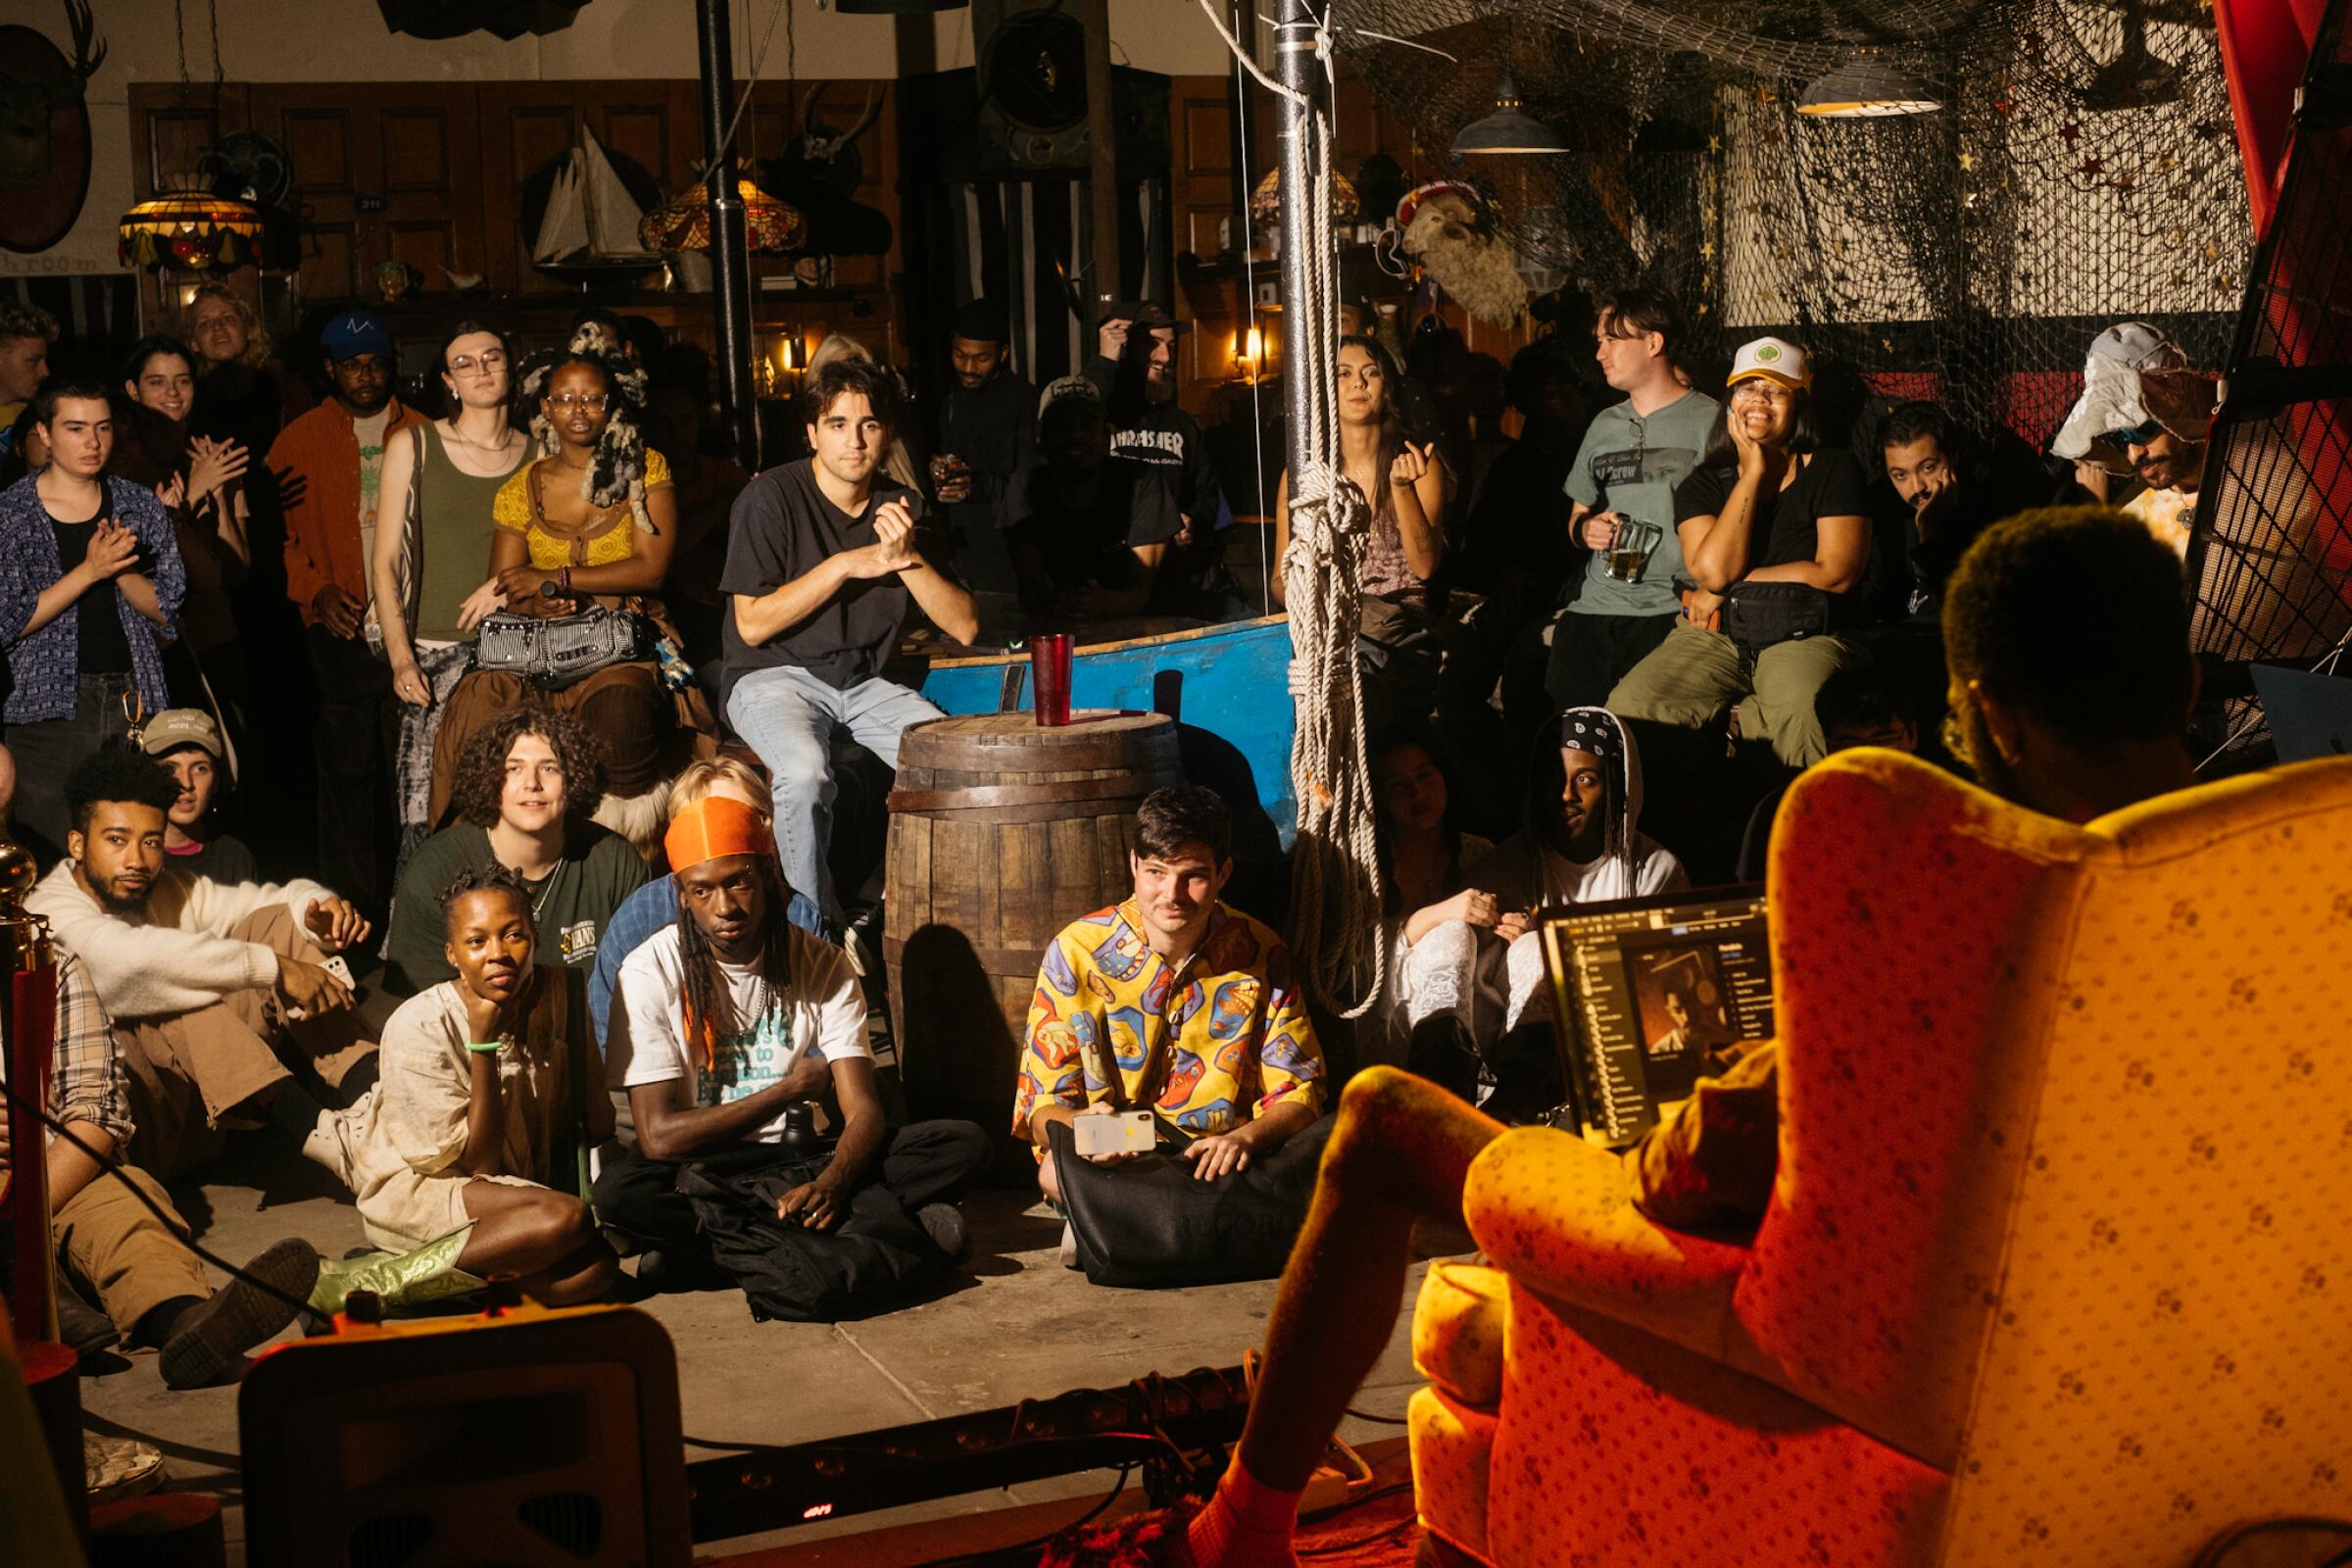 A group of people standing and seated in a room look at someone sitting in an orange chair